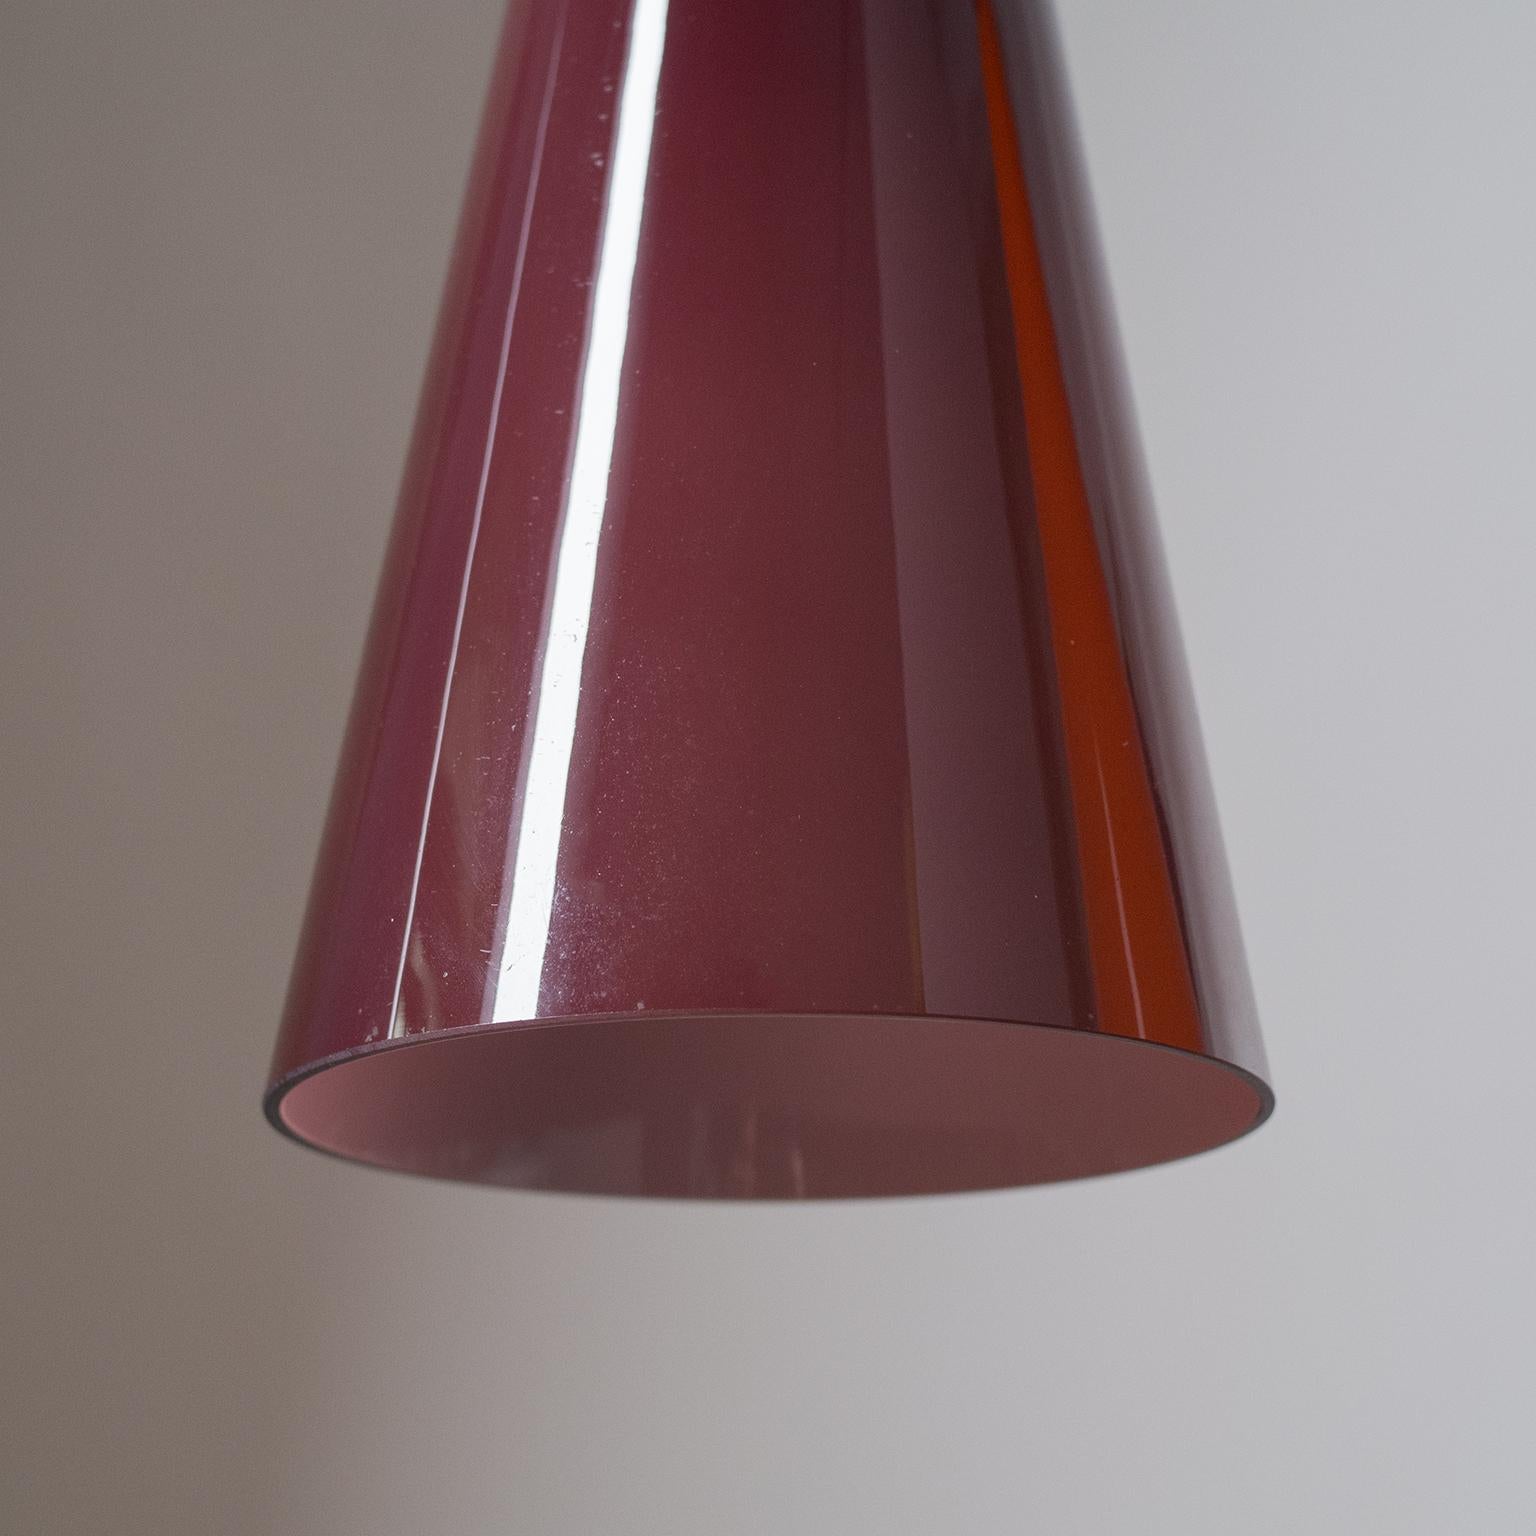 Danish Suspension Chandelier, 1960s, Colored Glass and Teak 4